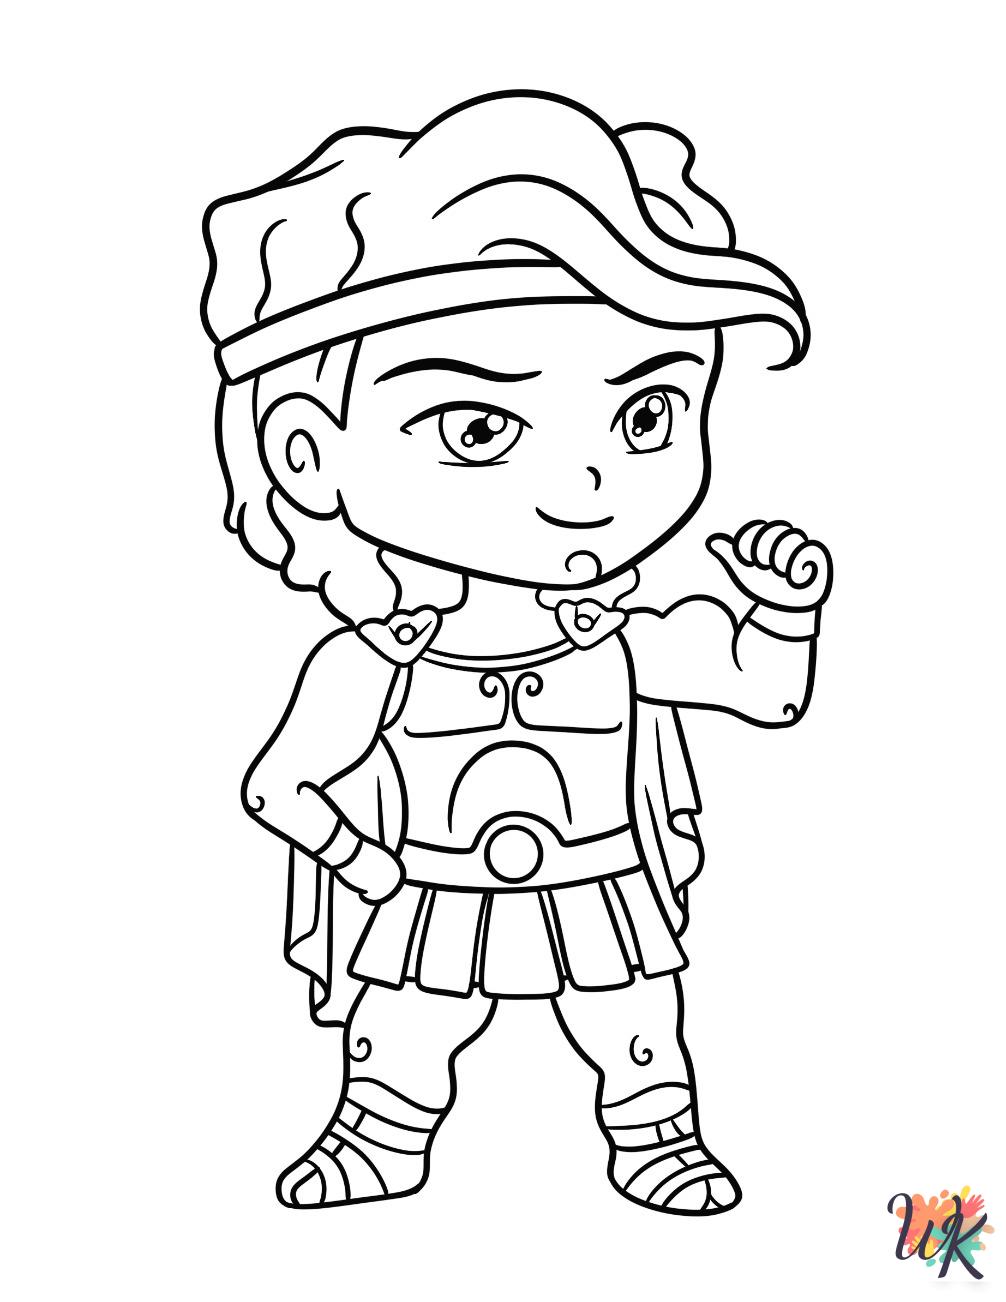 merry Hercules coloring pages